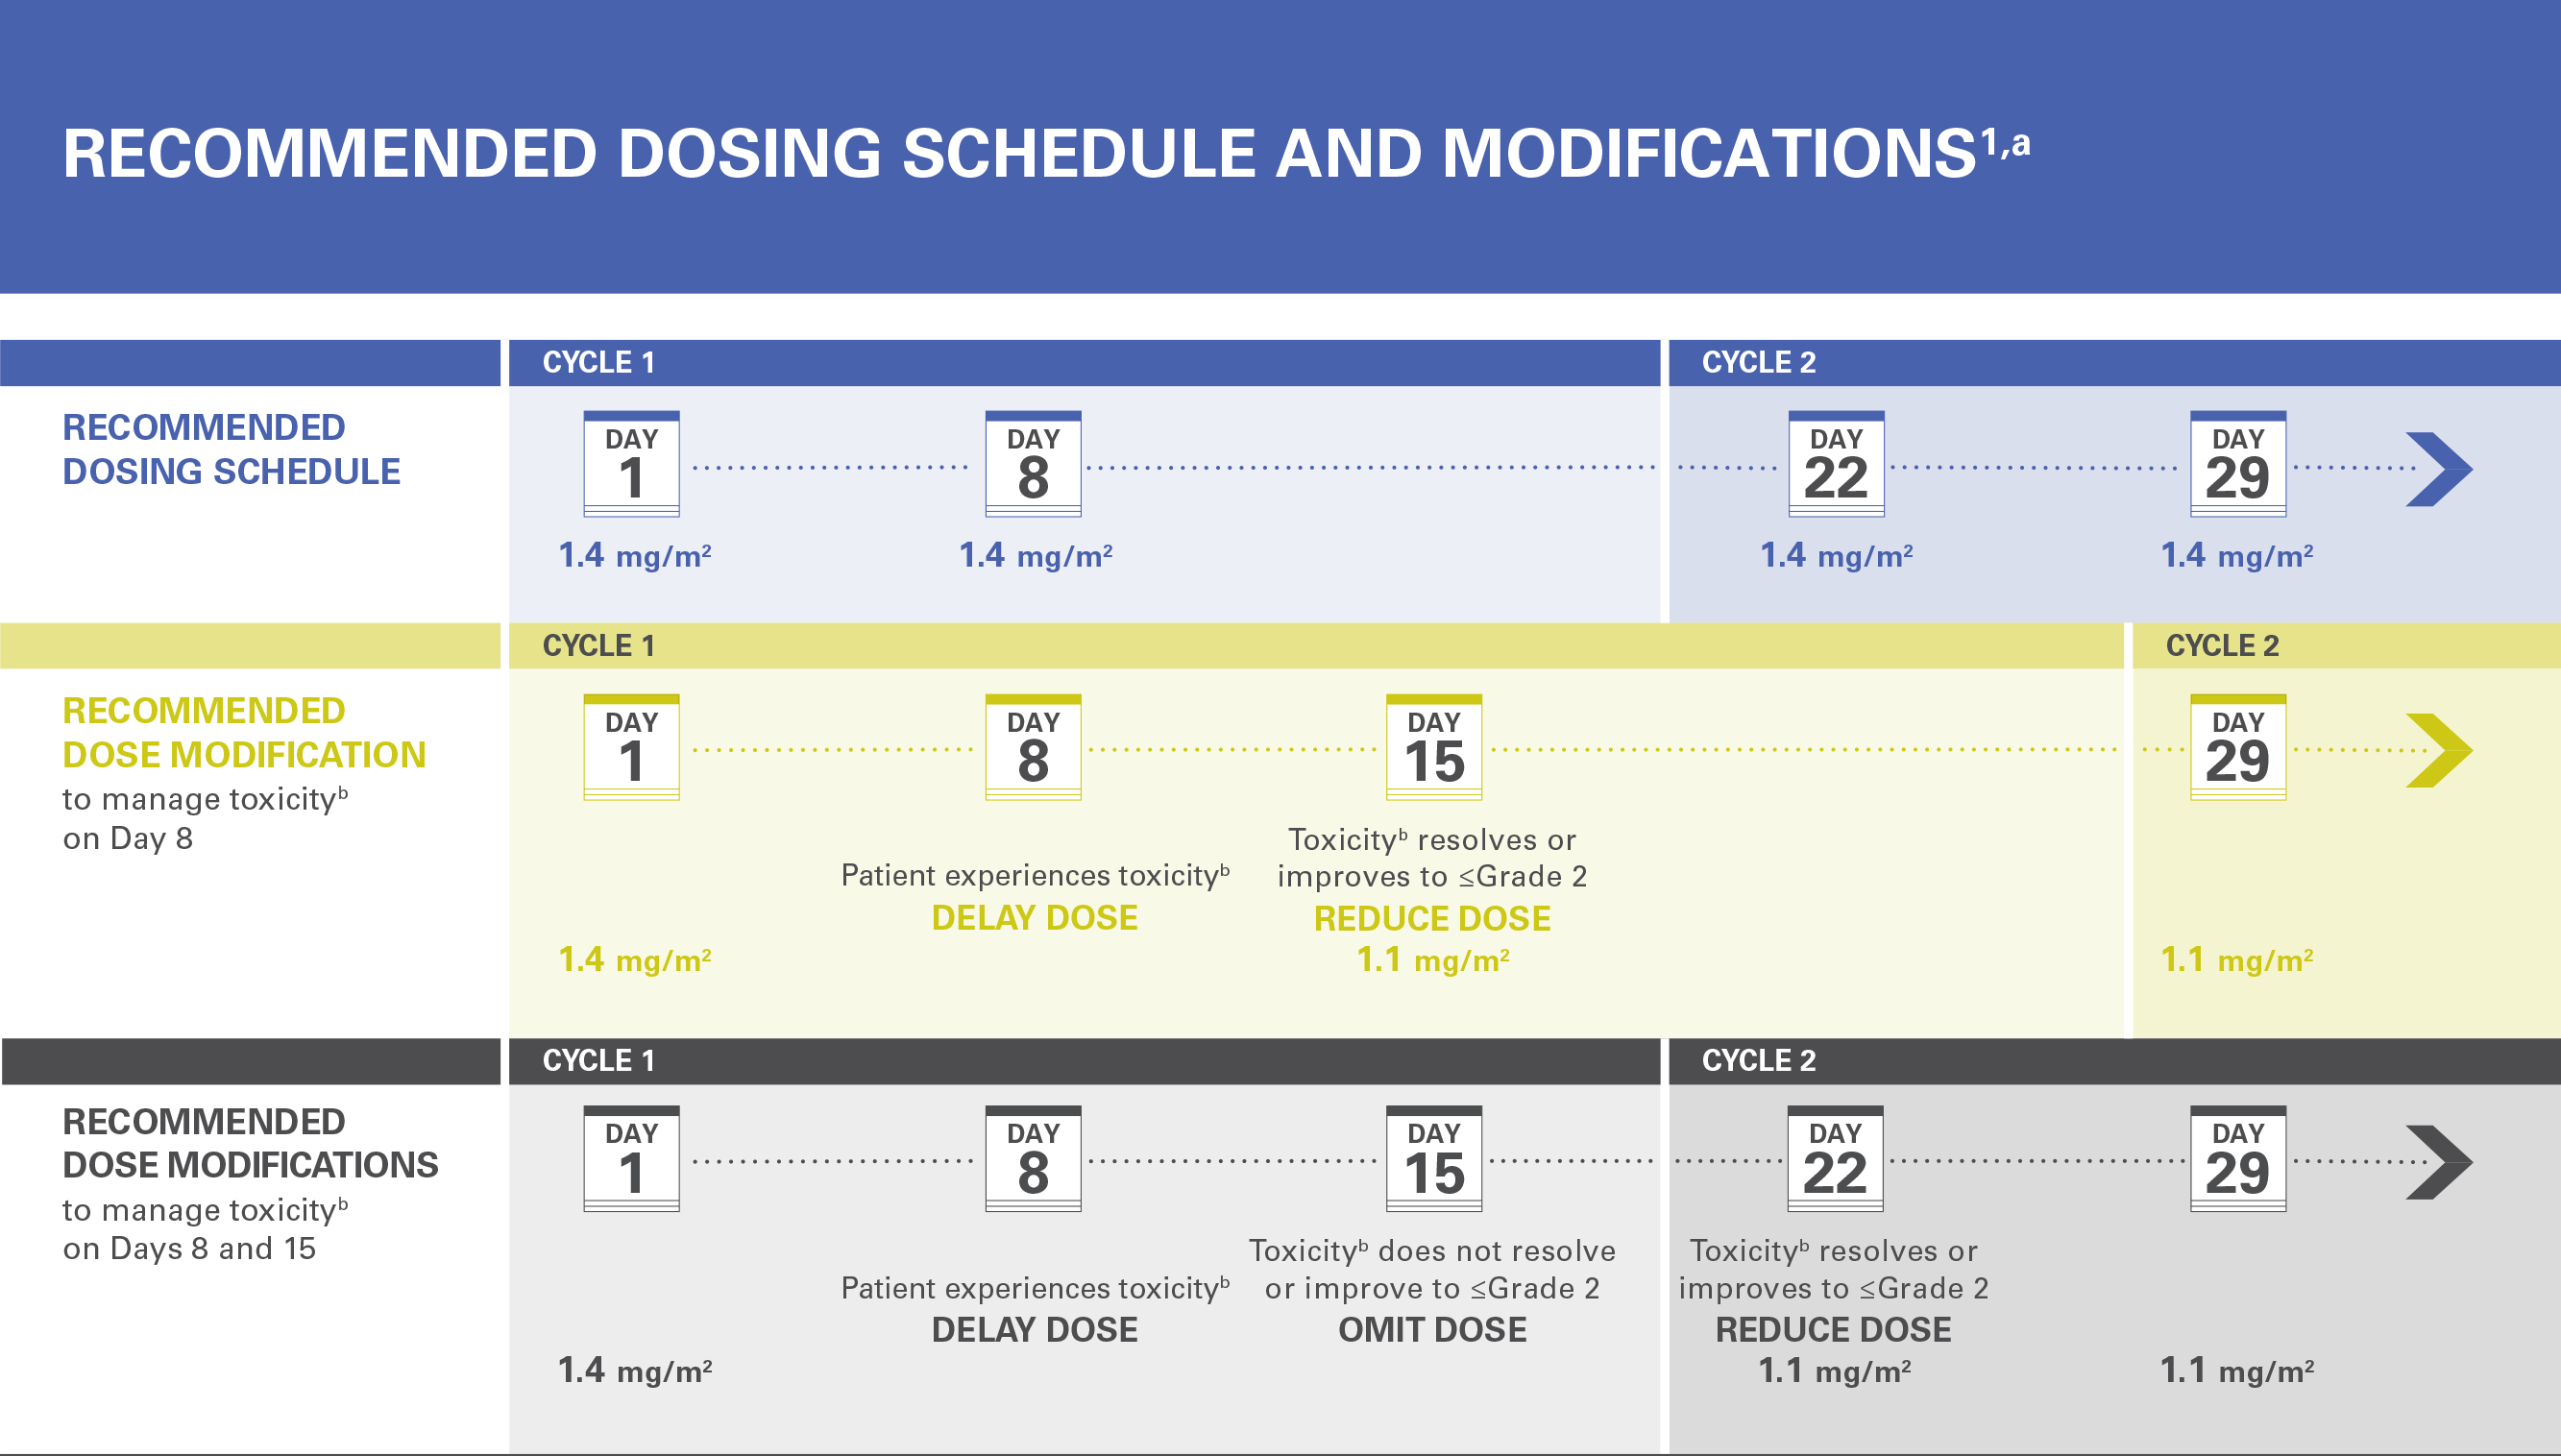 Recommended Dose Schedule